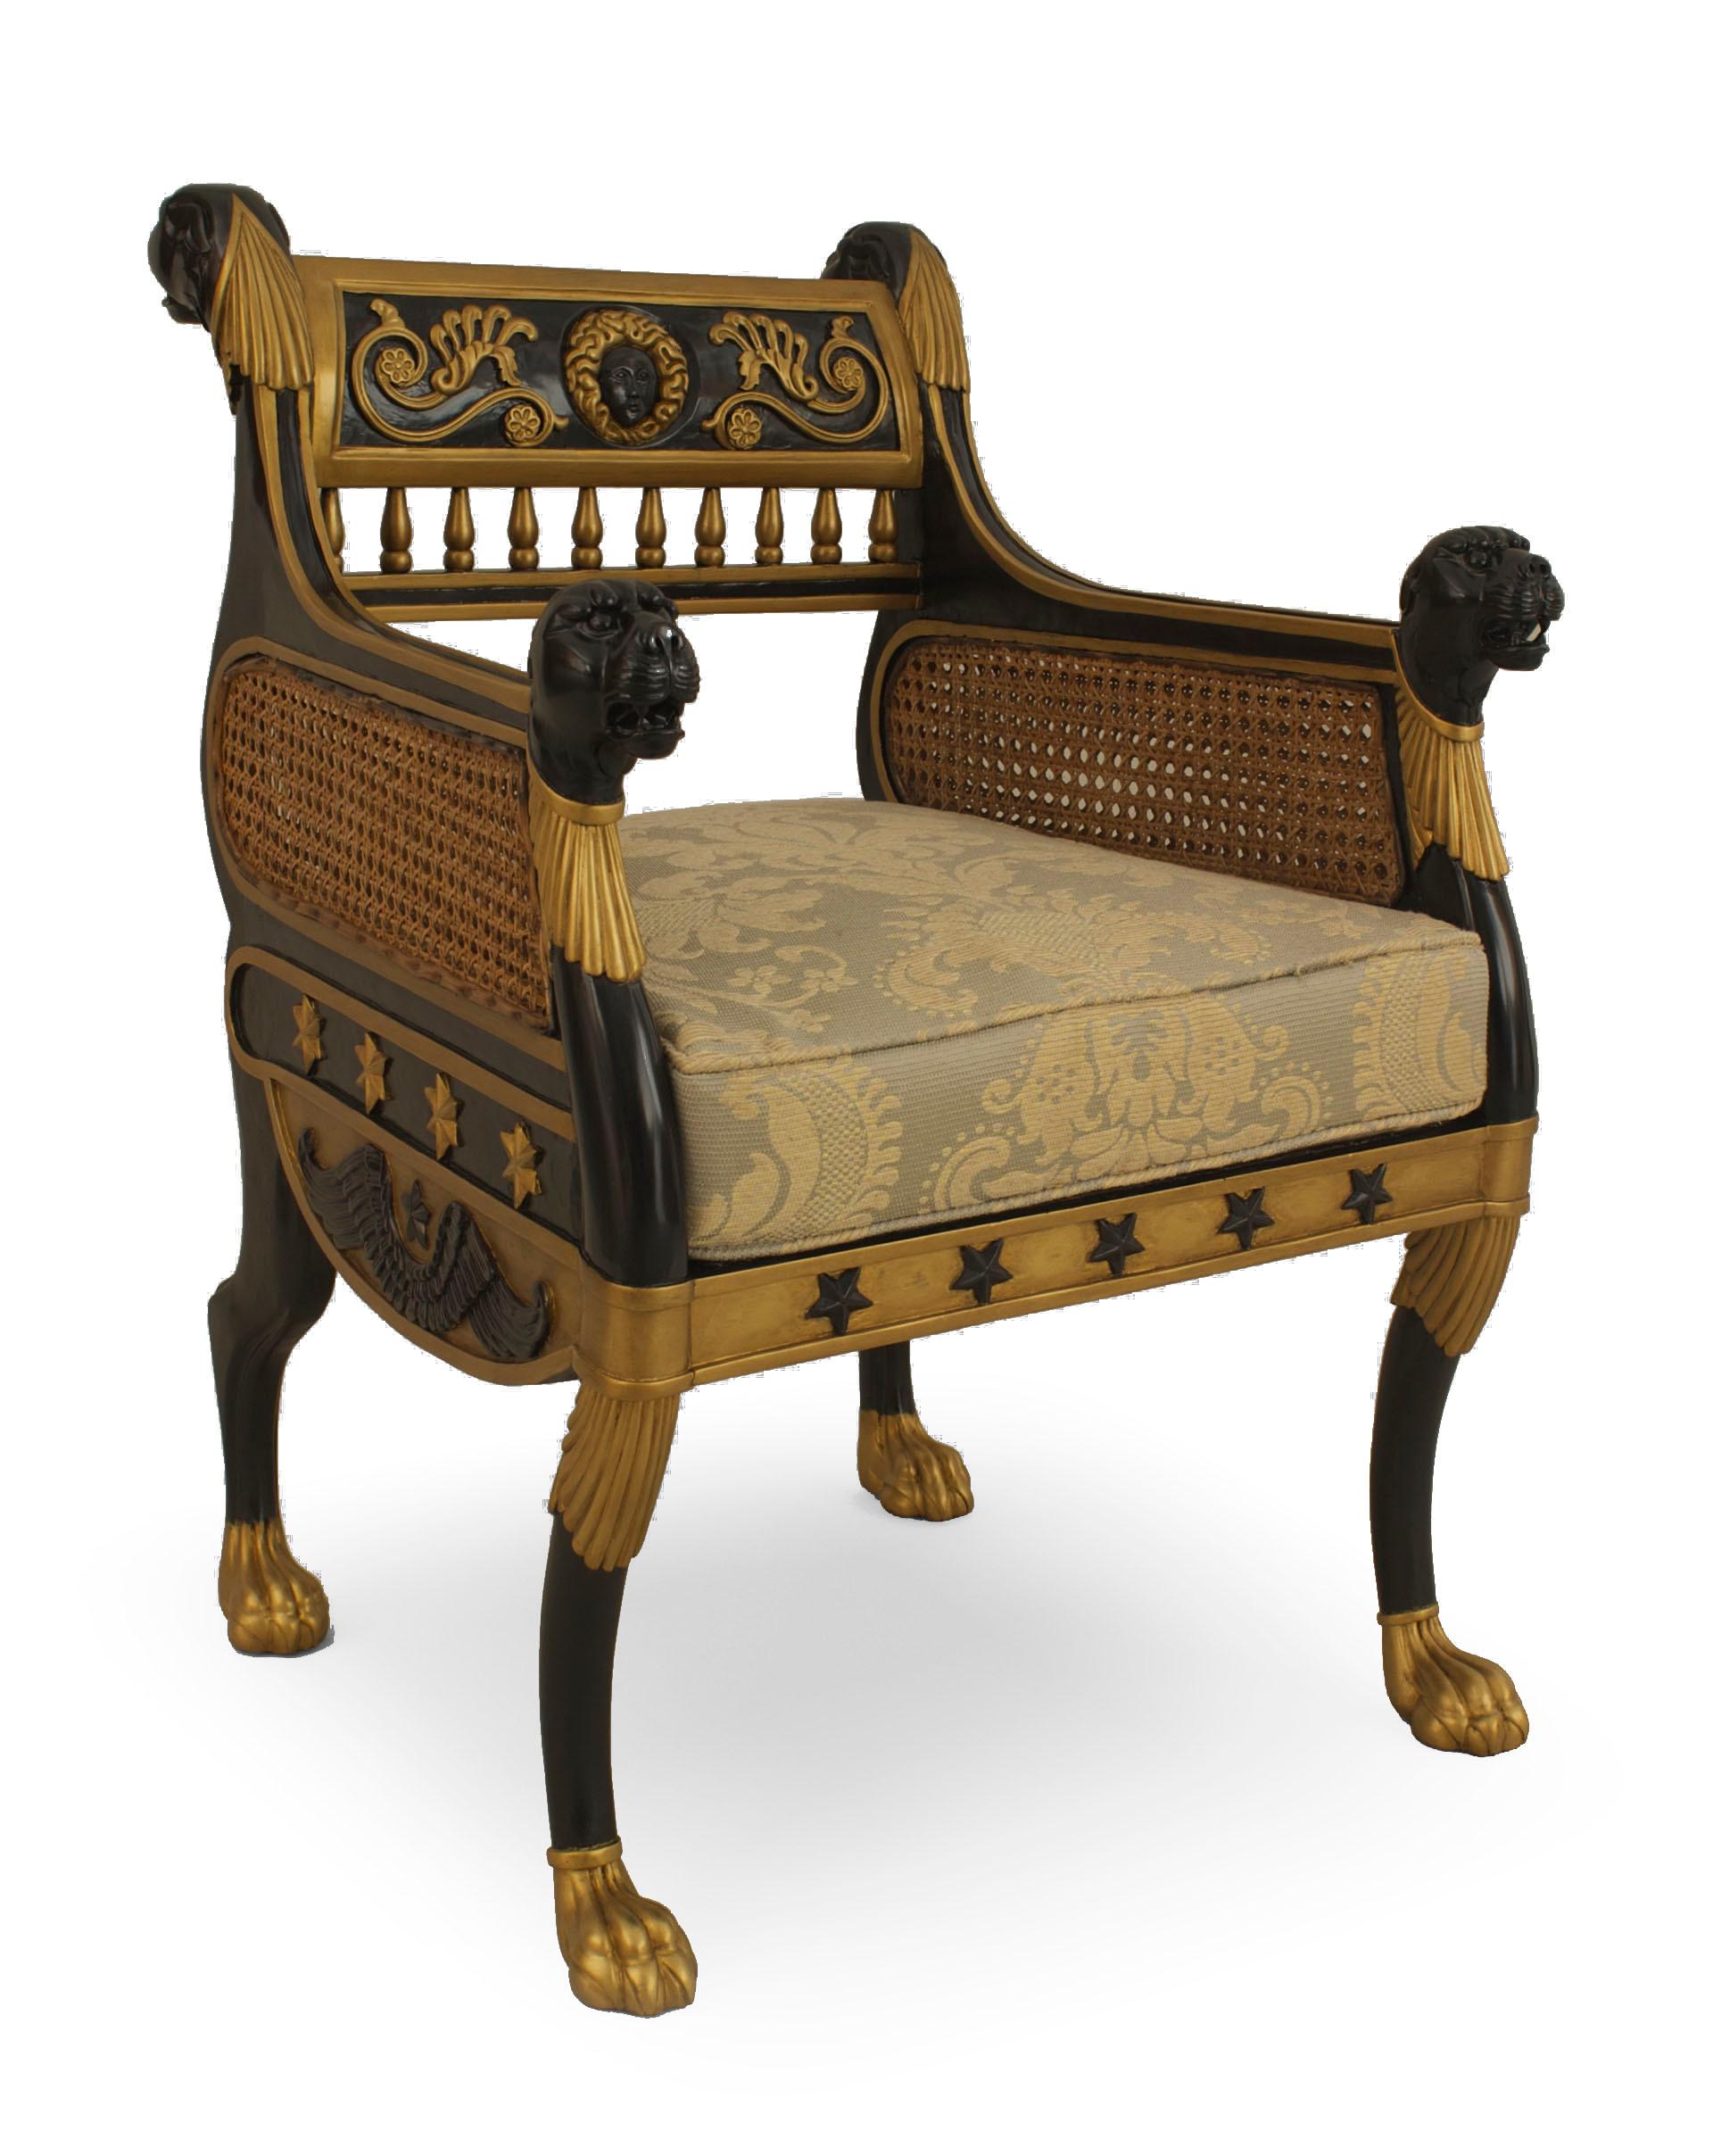 Pairof English Regency (20th Century) ebonized and gilt trimmed bergere Armchairs with cane sides and carved lion heads on back and arms. (Reproduction of Geo Smith design) .